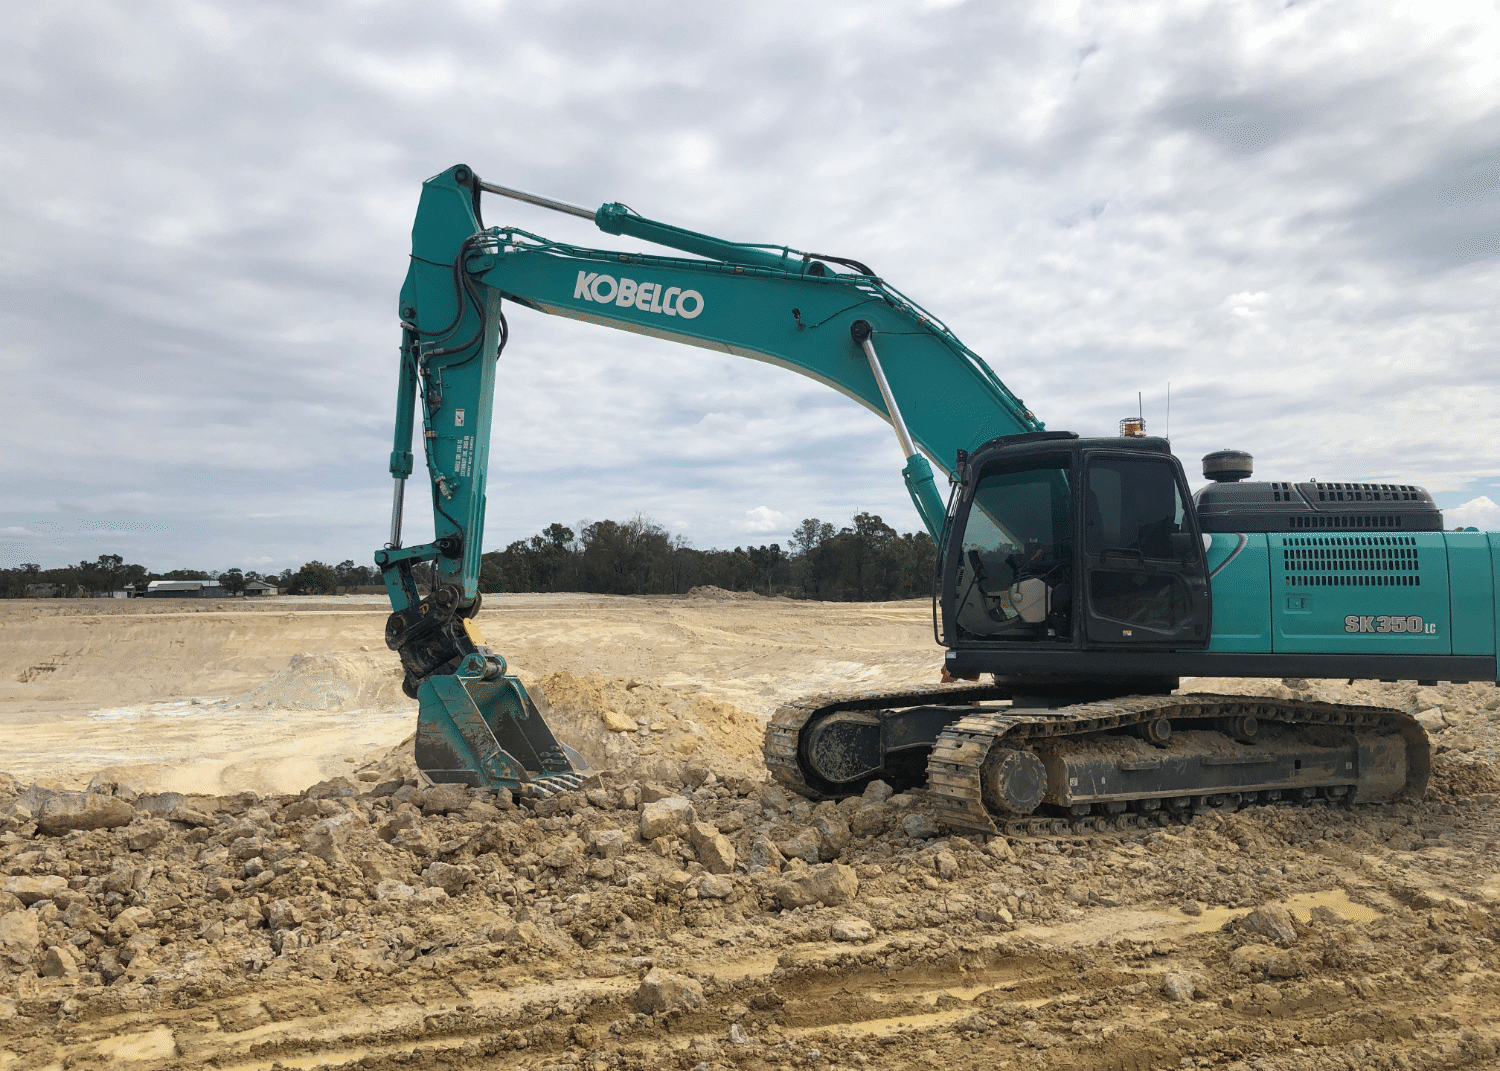 What to Look for Before Buying a Used Excavator